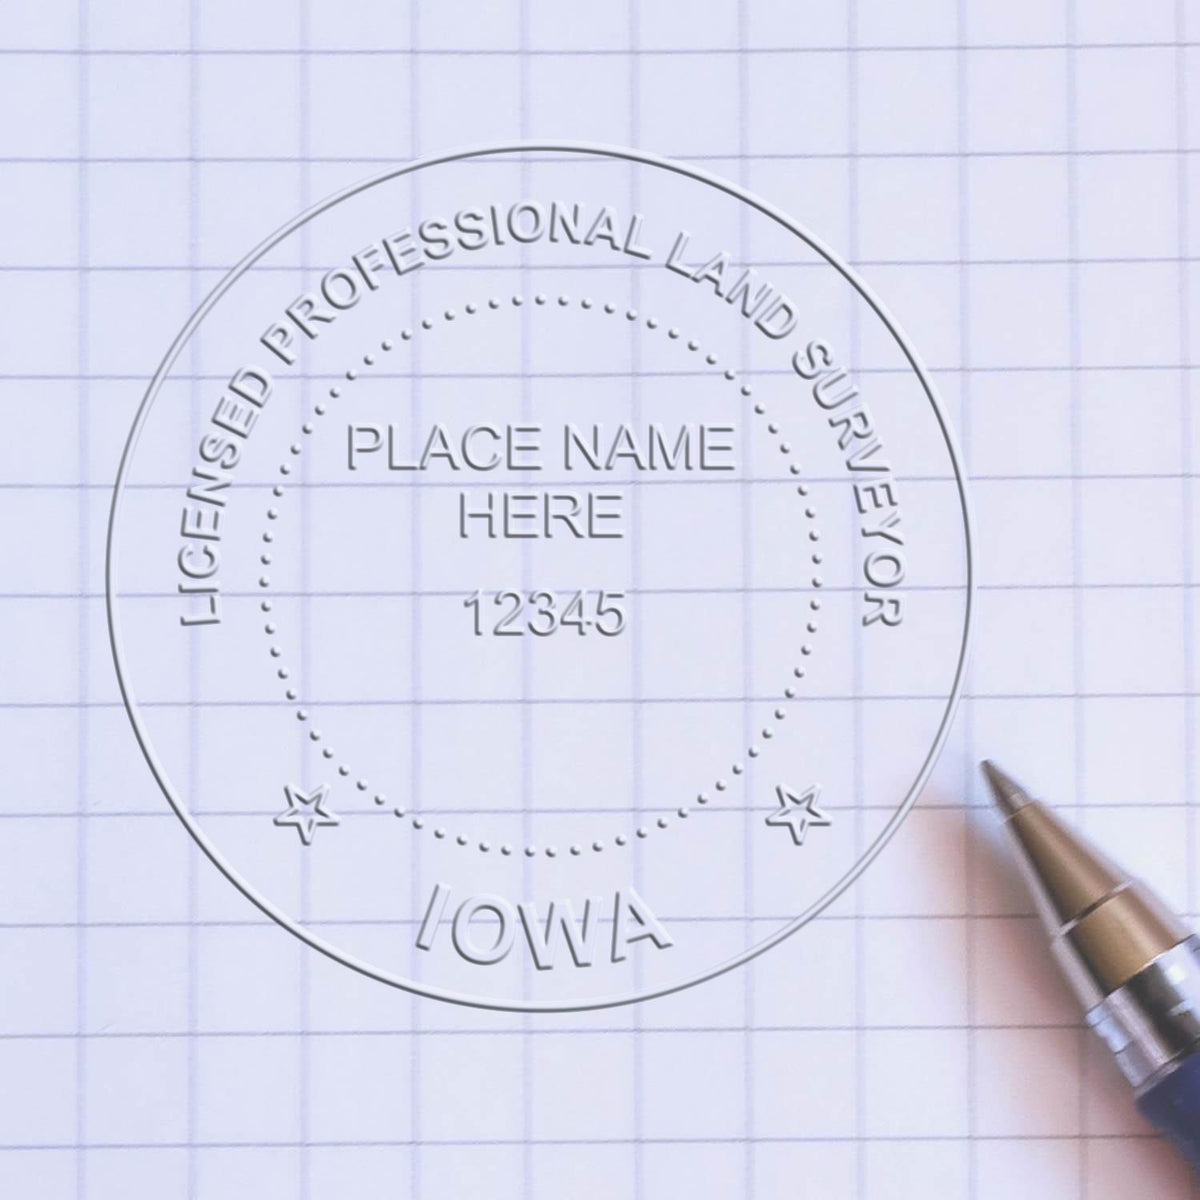 An in use photo of the Hybrid Iowa Land Surveyor Seal showing a sample imprint on a cardstock